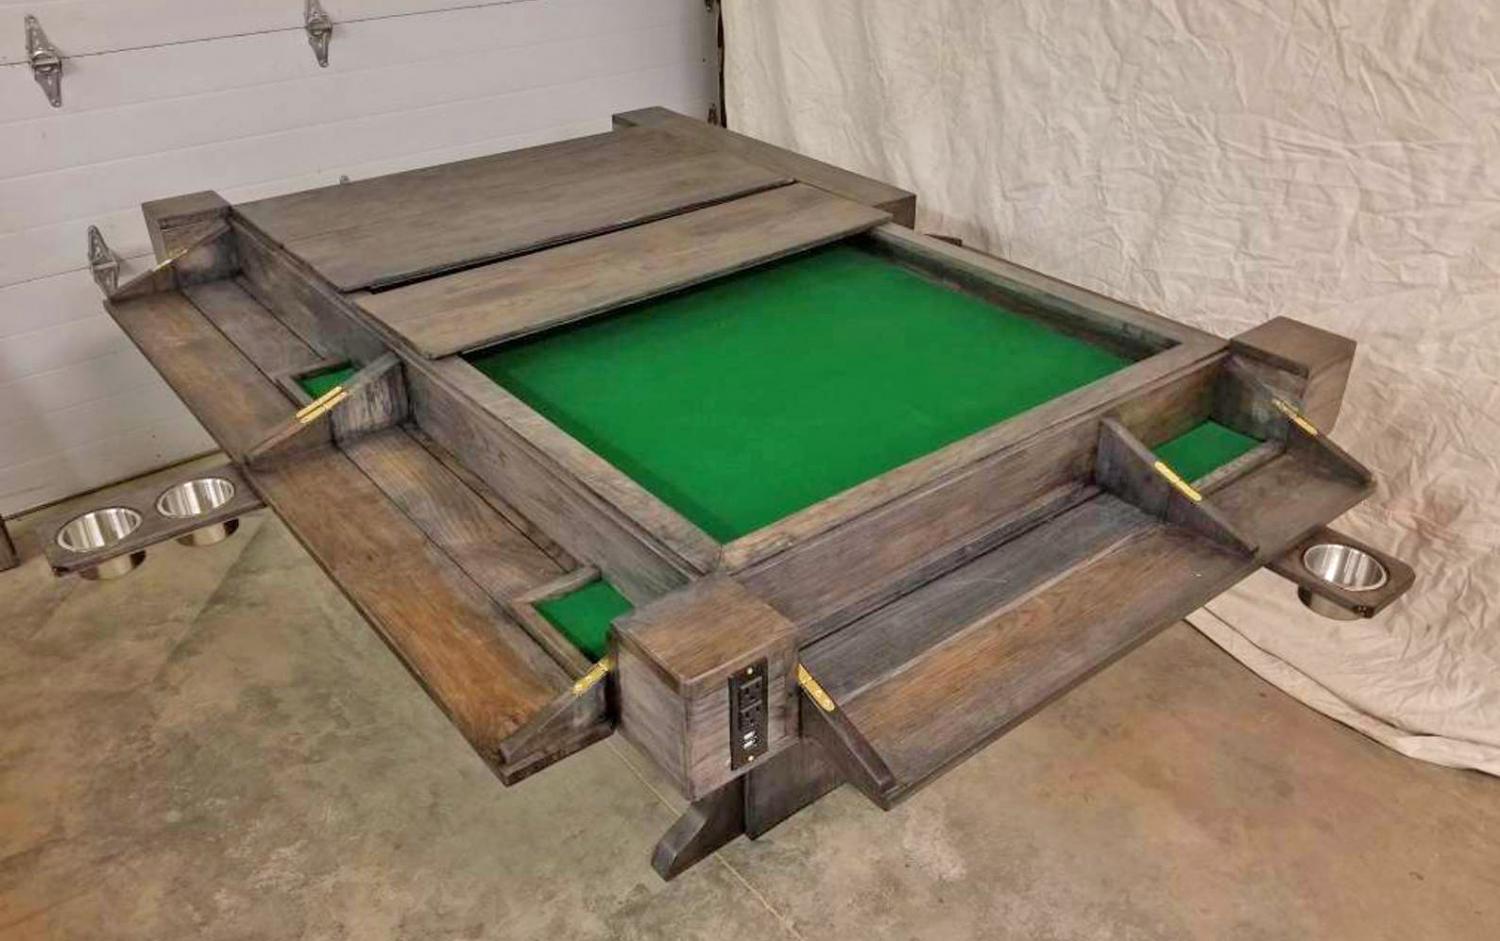 The Ultimate Gaming Table - Custom wooden board game tables with LED lighting